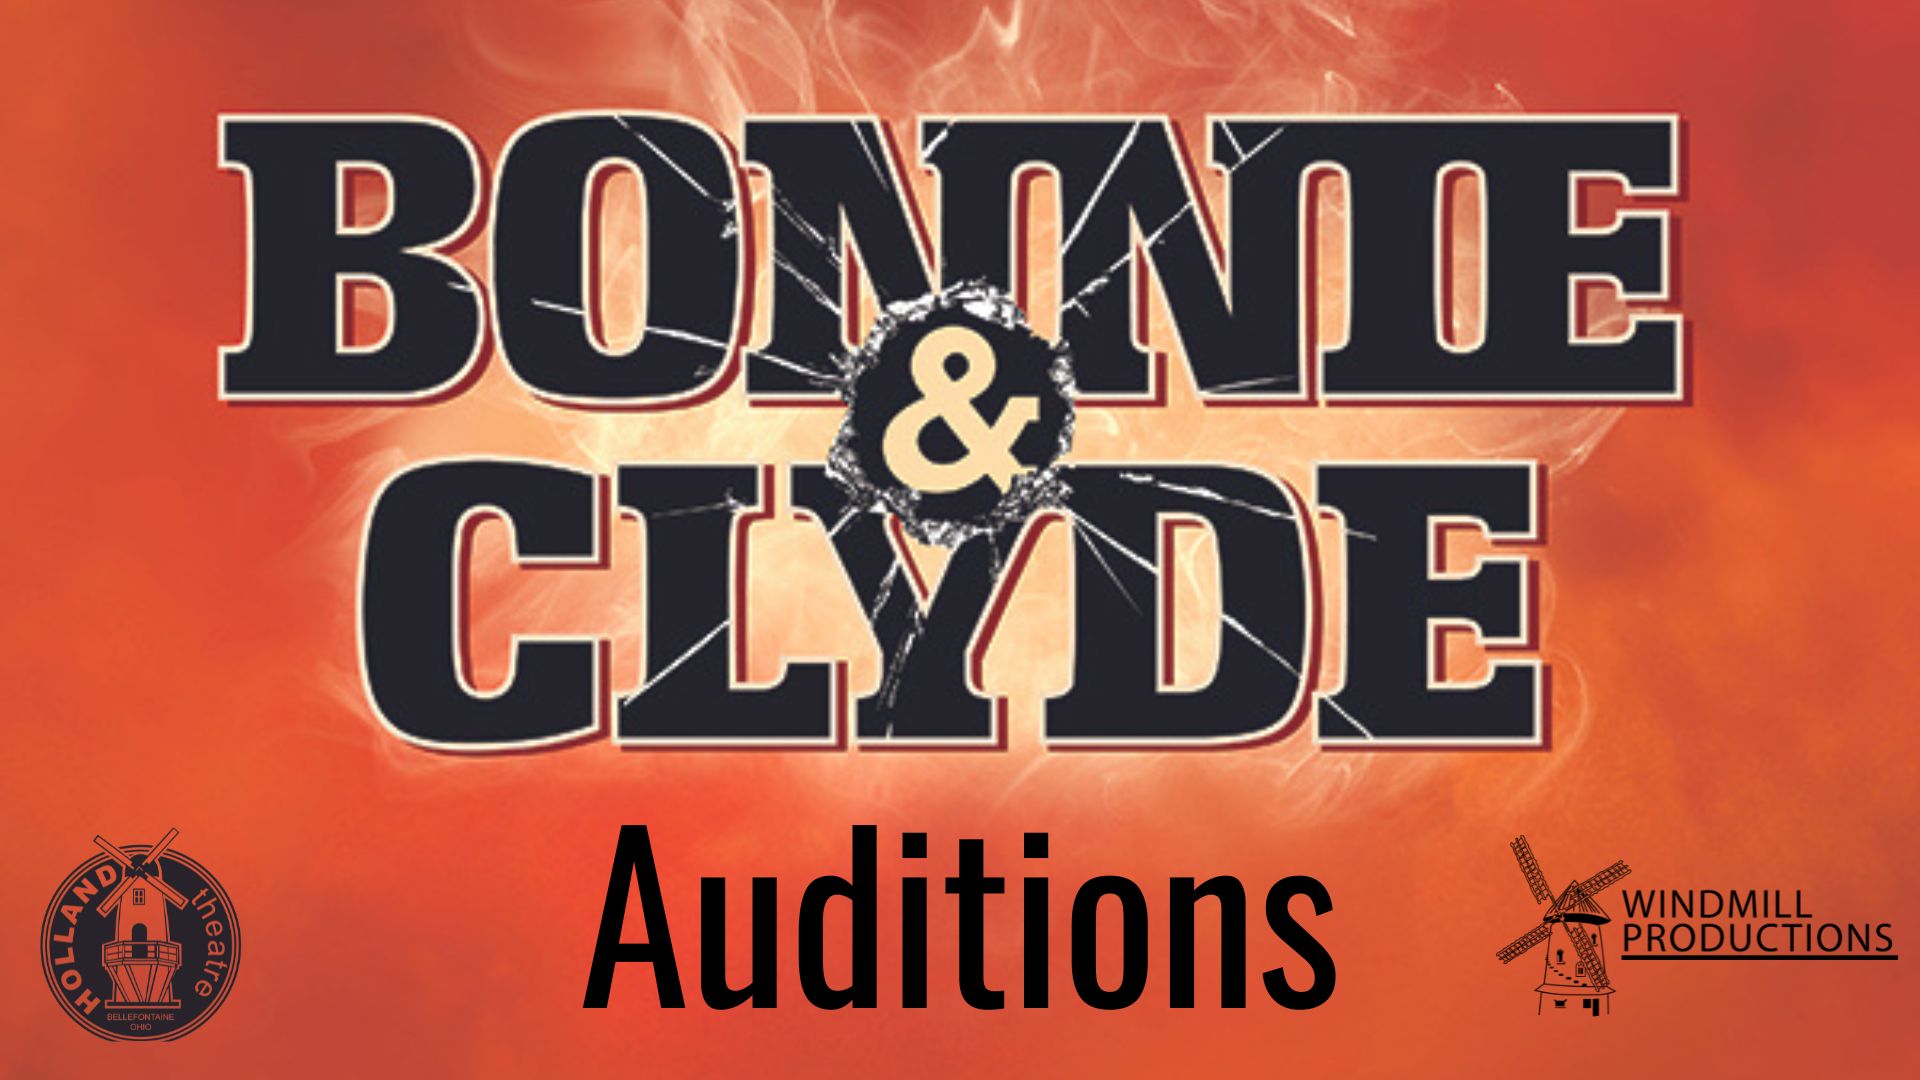 Auditions for Bonnie & Clyde